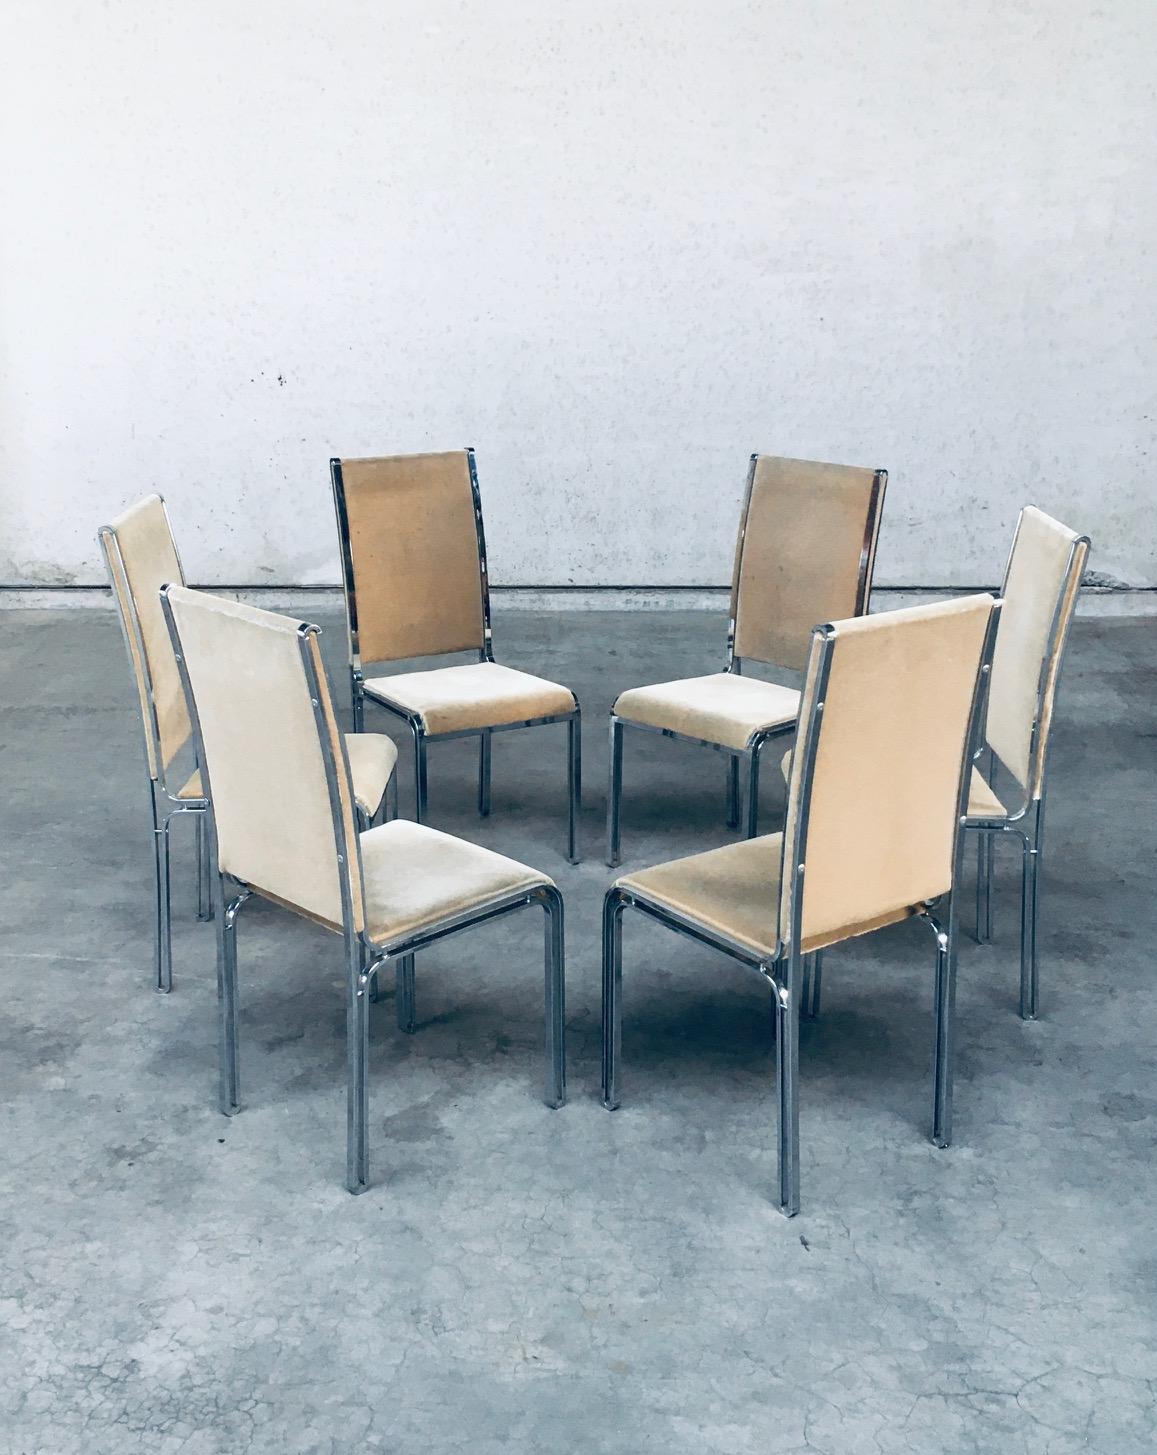 Hollywood Regency Style Dining Chair set by Romeo Rega, Italy 1970's For Sale 2